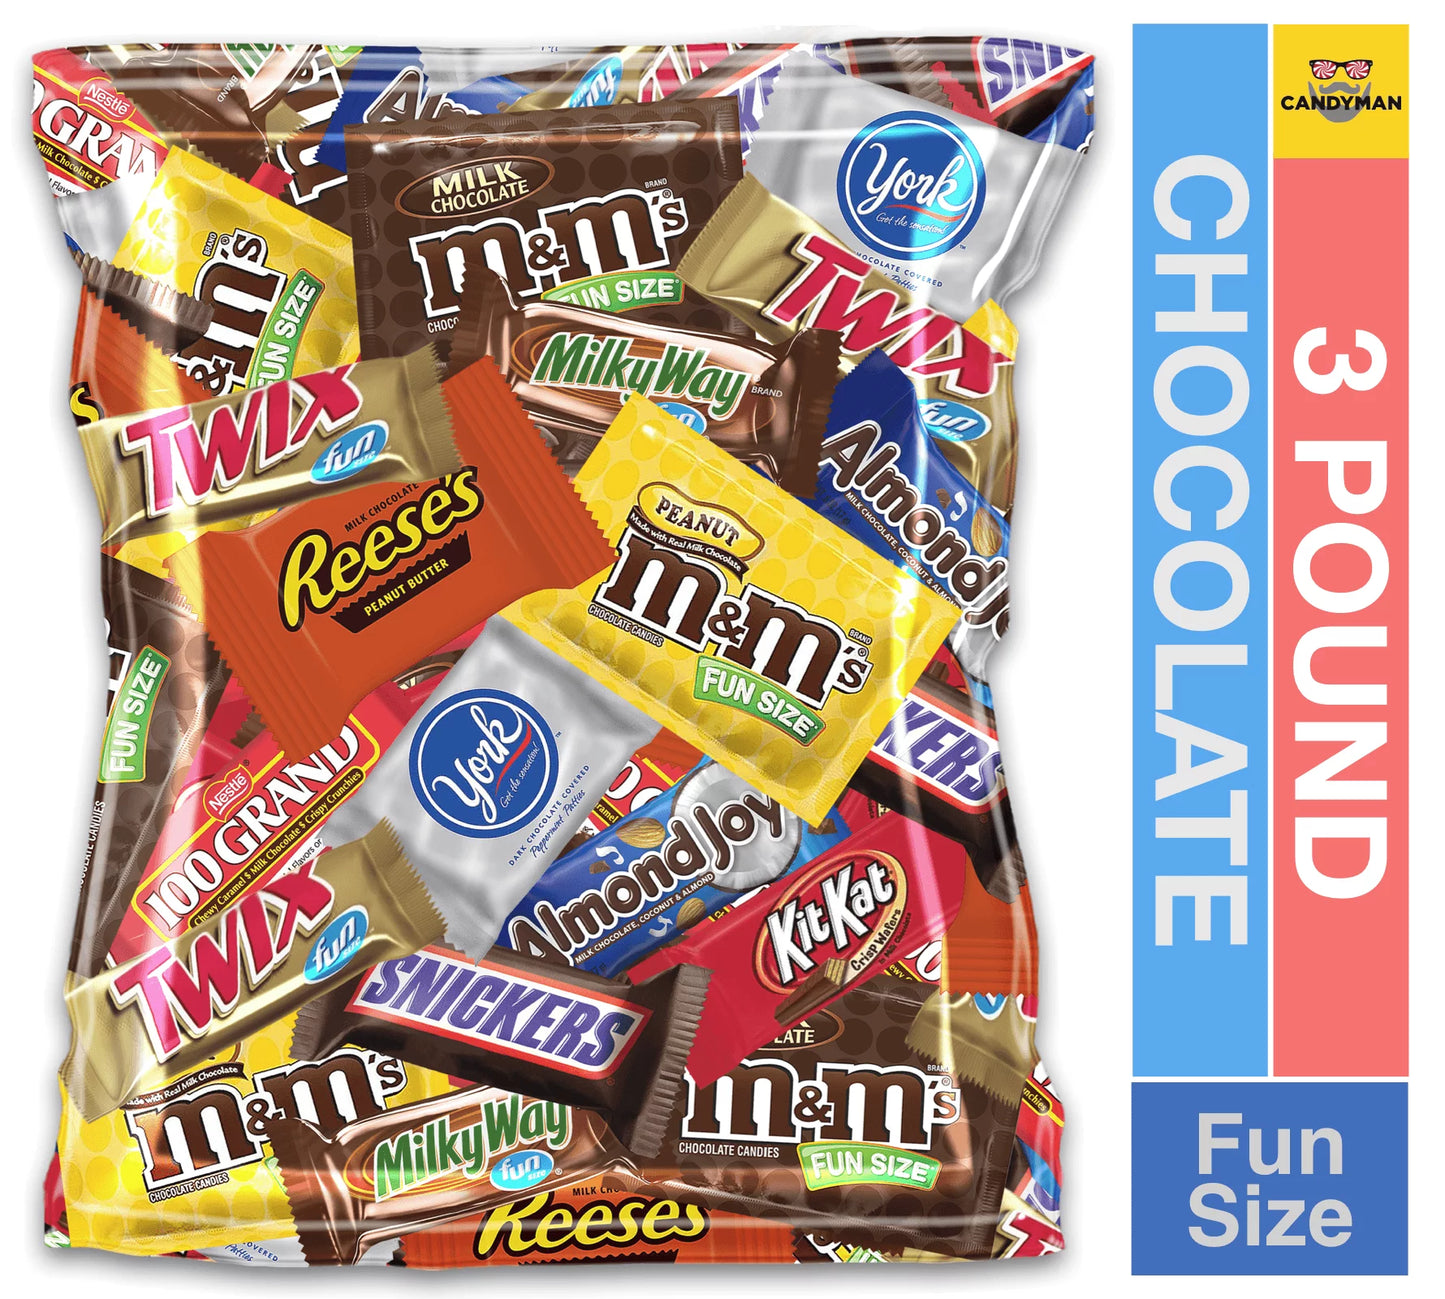 (3 LBS) Chocolate Candy Bundle with M&M'S Milk Chocolate, M&M'S Peanut, Skittles, Starburst, Snickers, Milky Way & Twix Individually Wrapped Candy